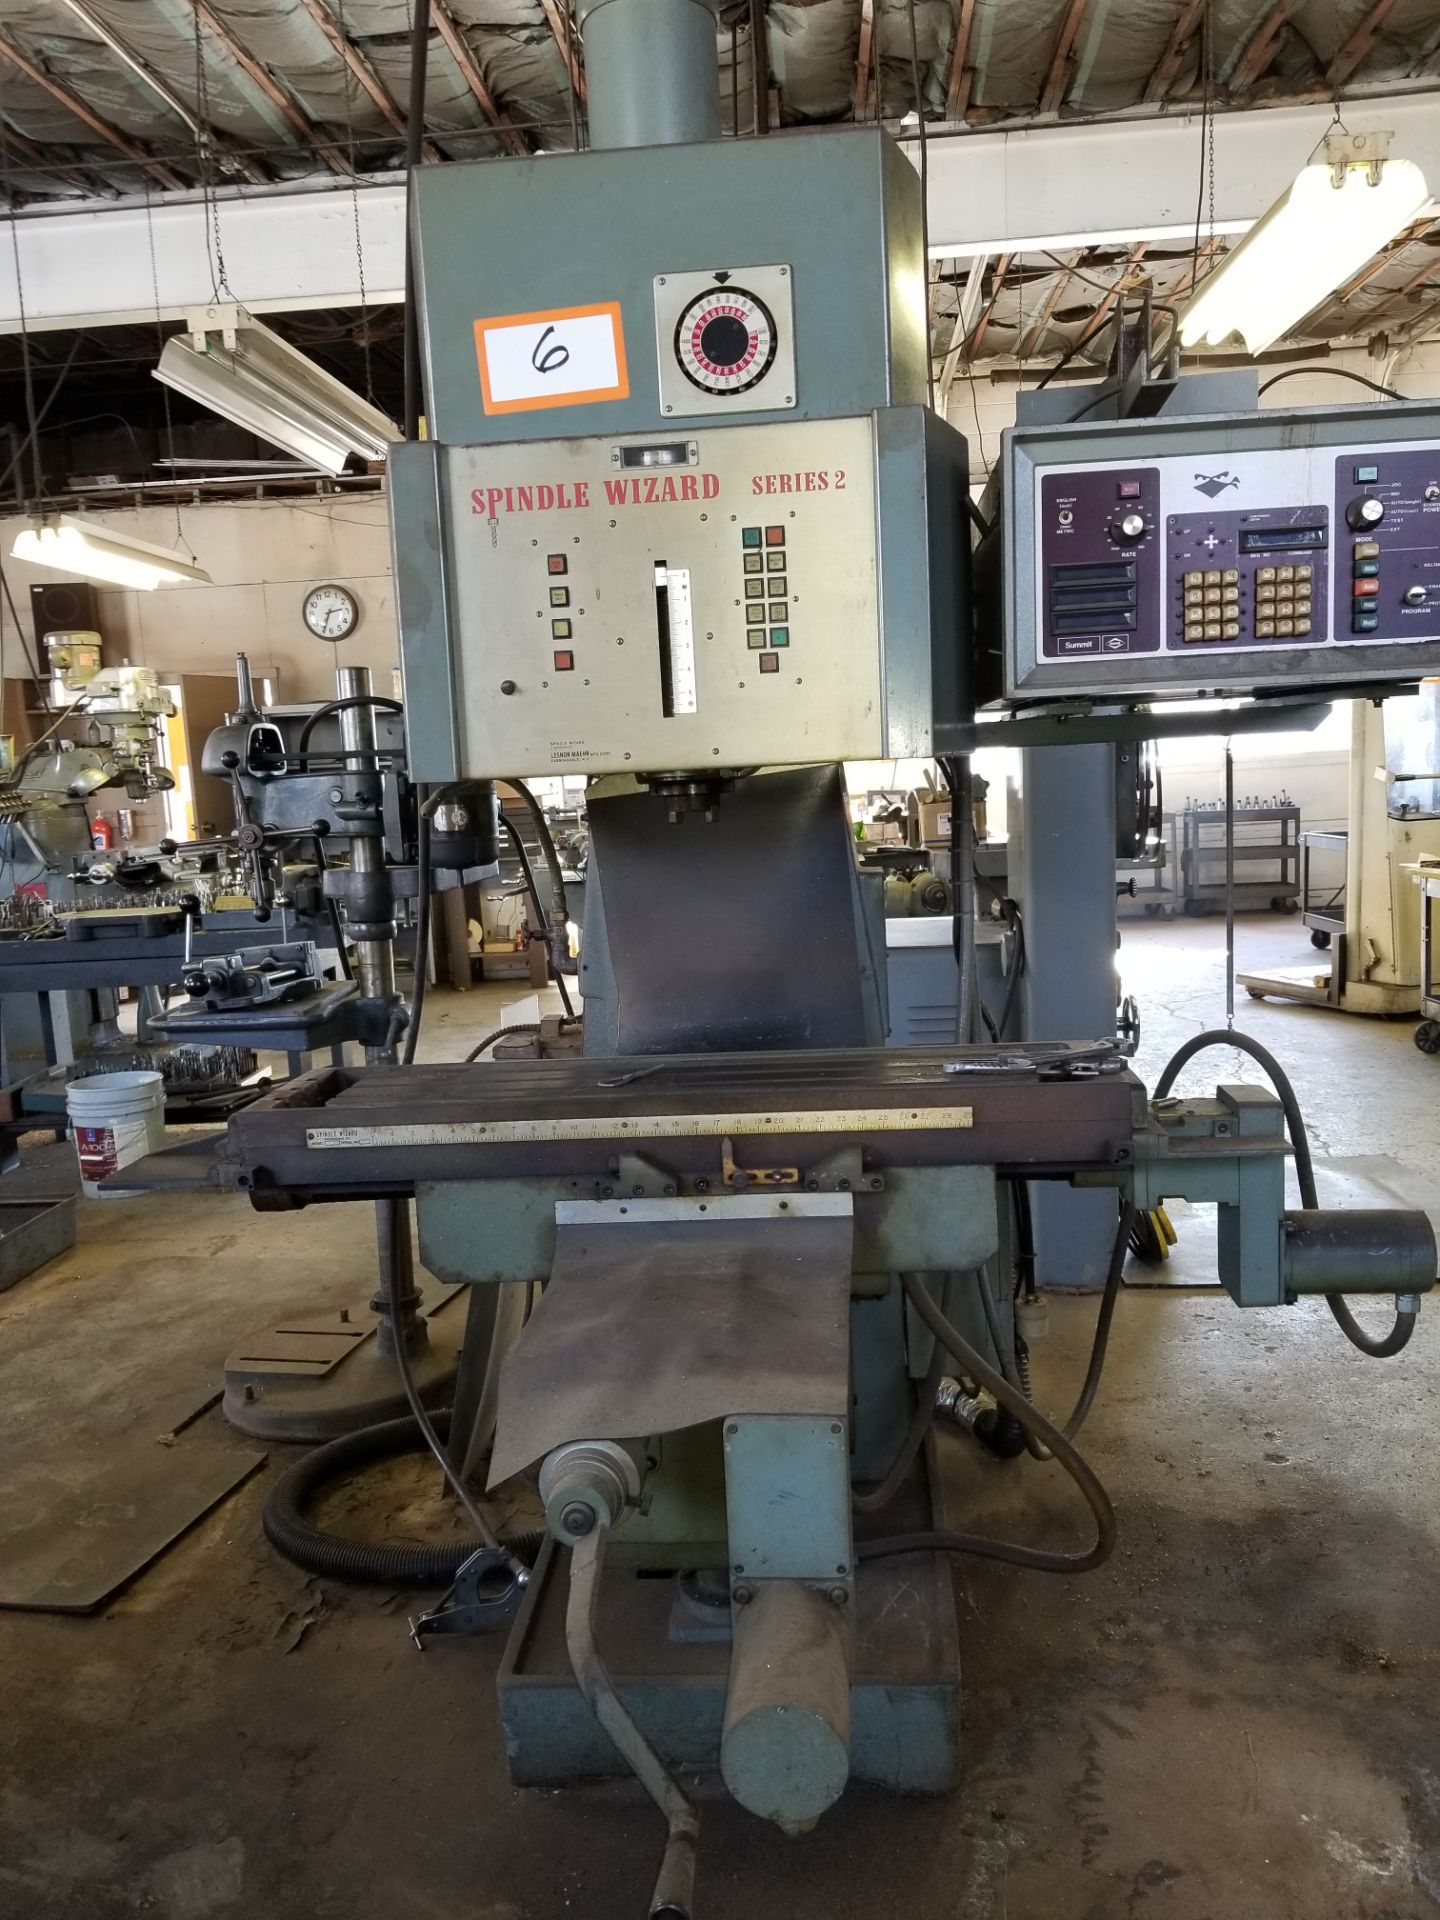 Spindle Wizard Model MK2 3-Axis Vertical Milling Machine